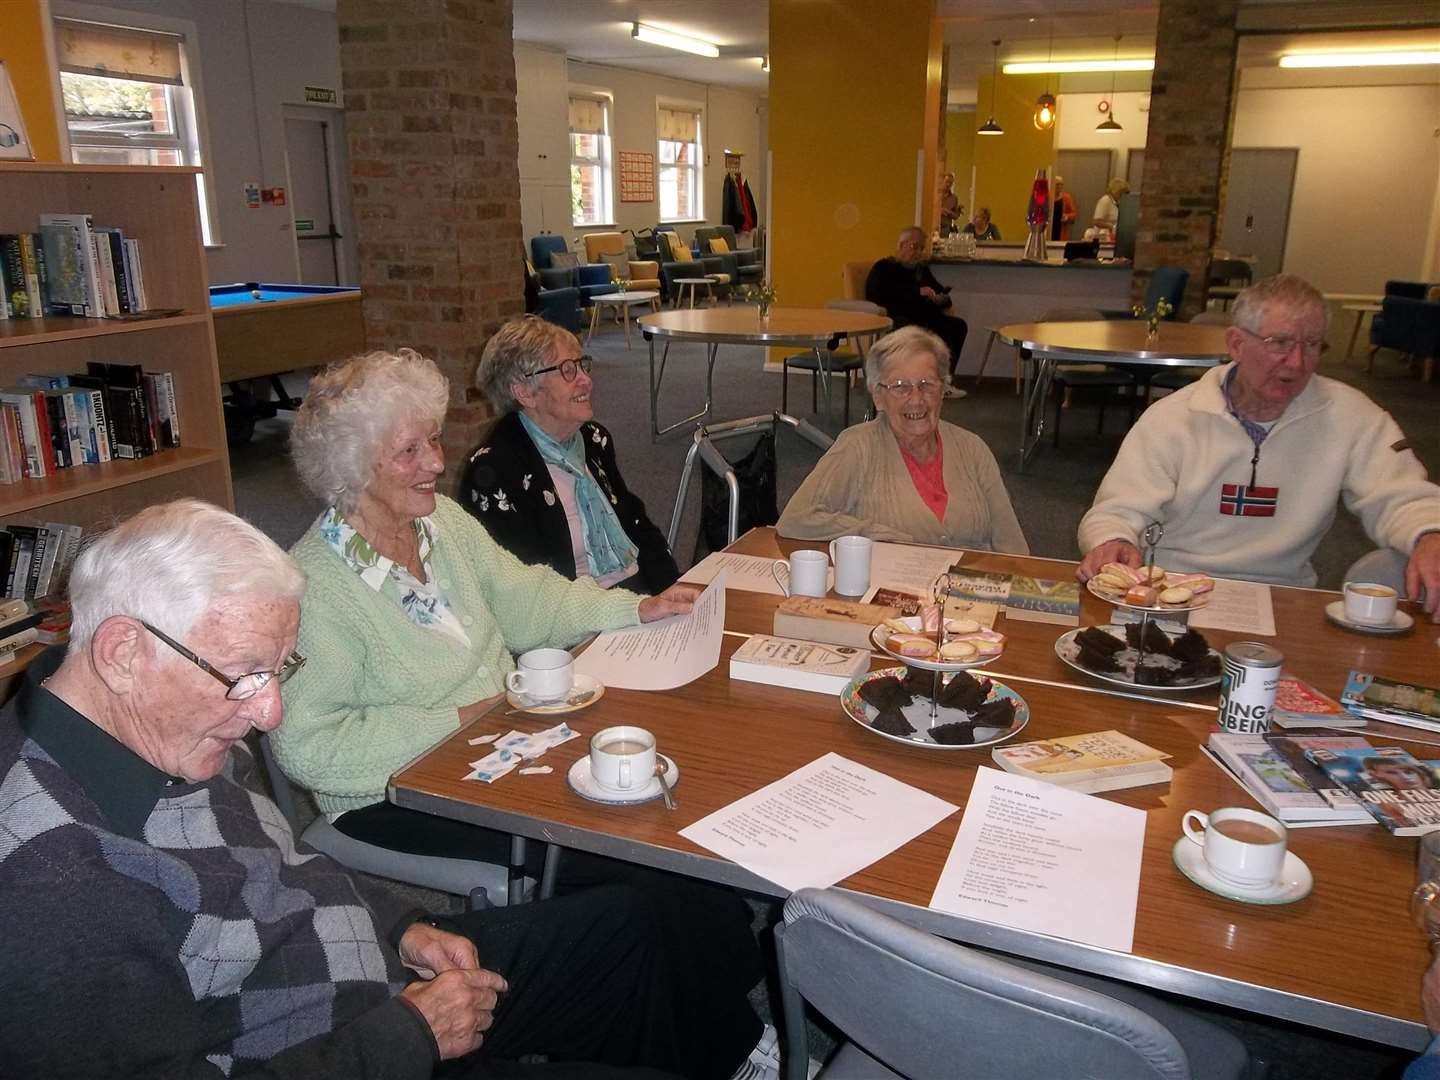 The Bookbinders group at Age UK in Folkestone received an afternoon tea for winning a reading challenge.